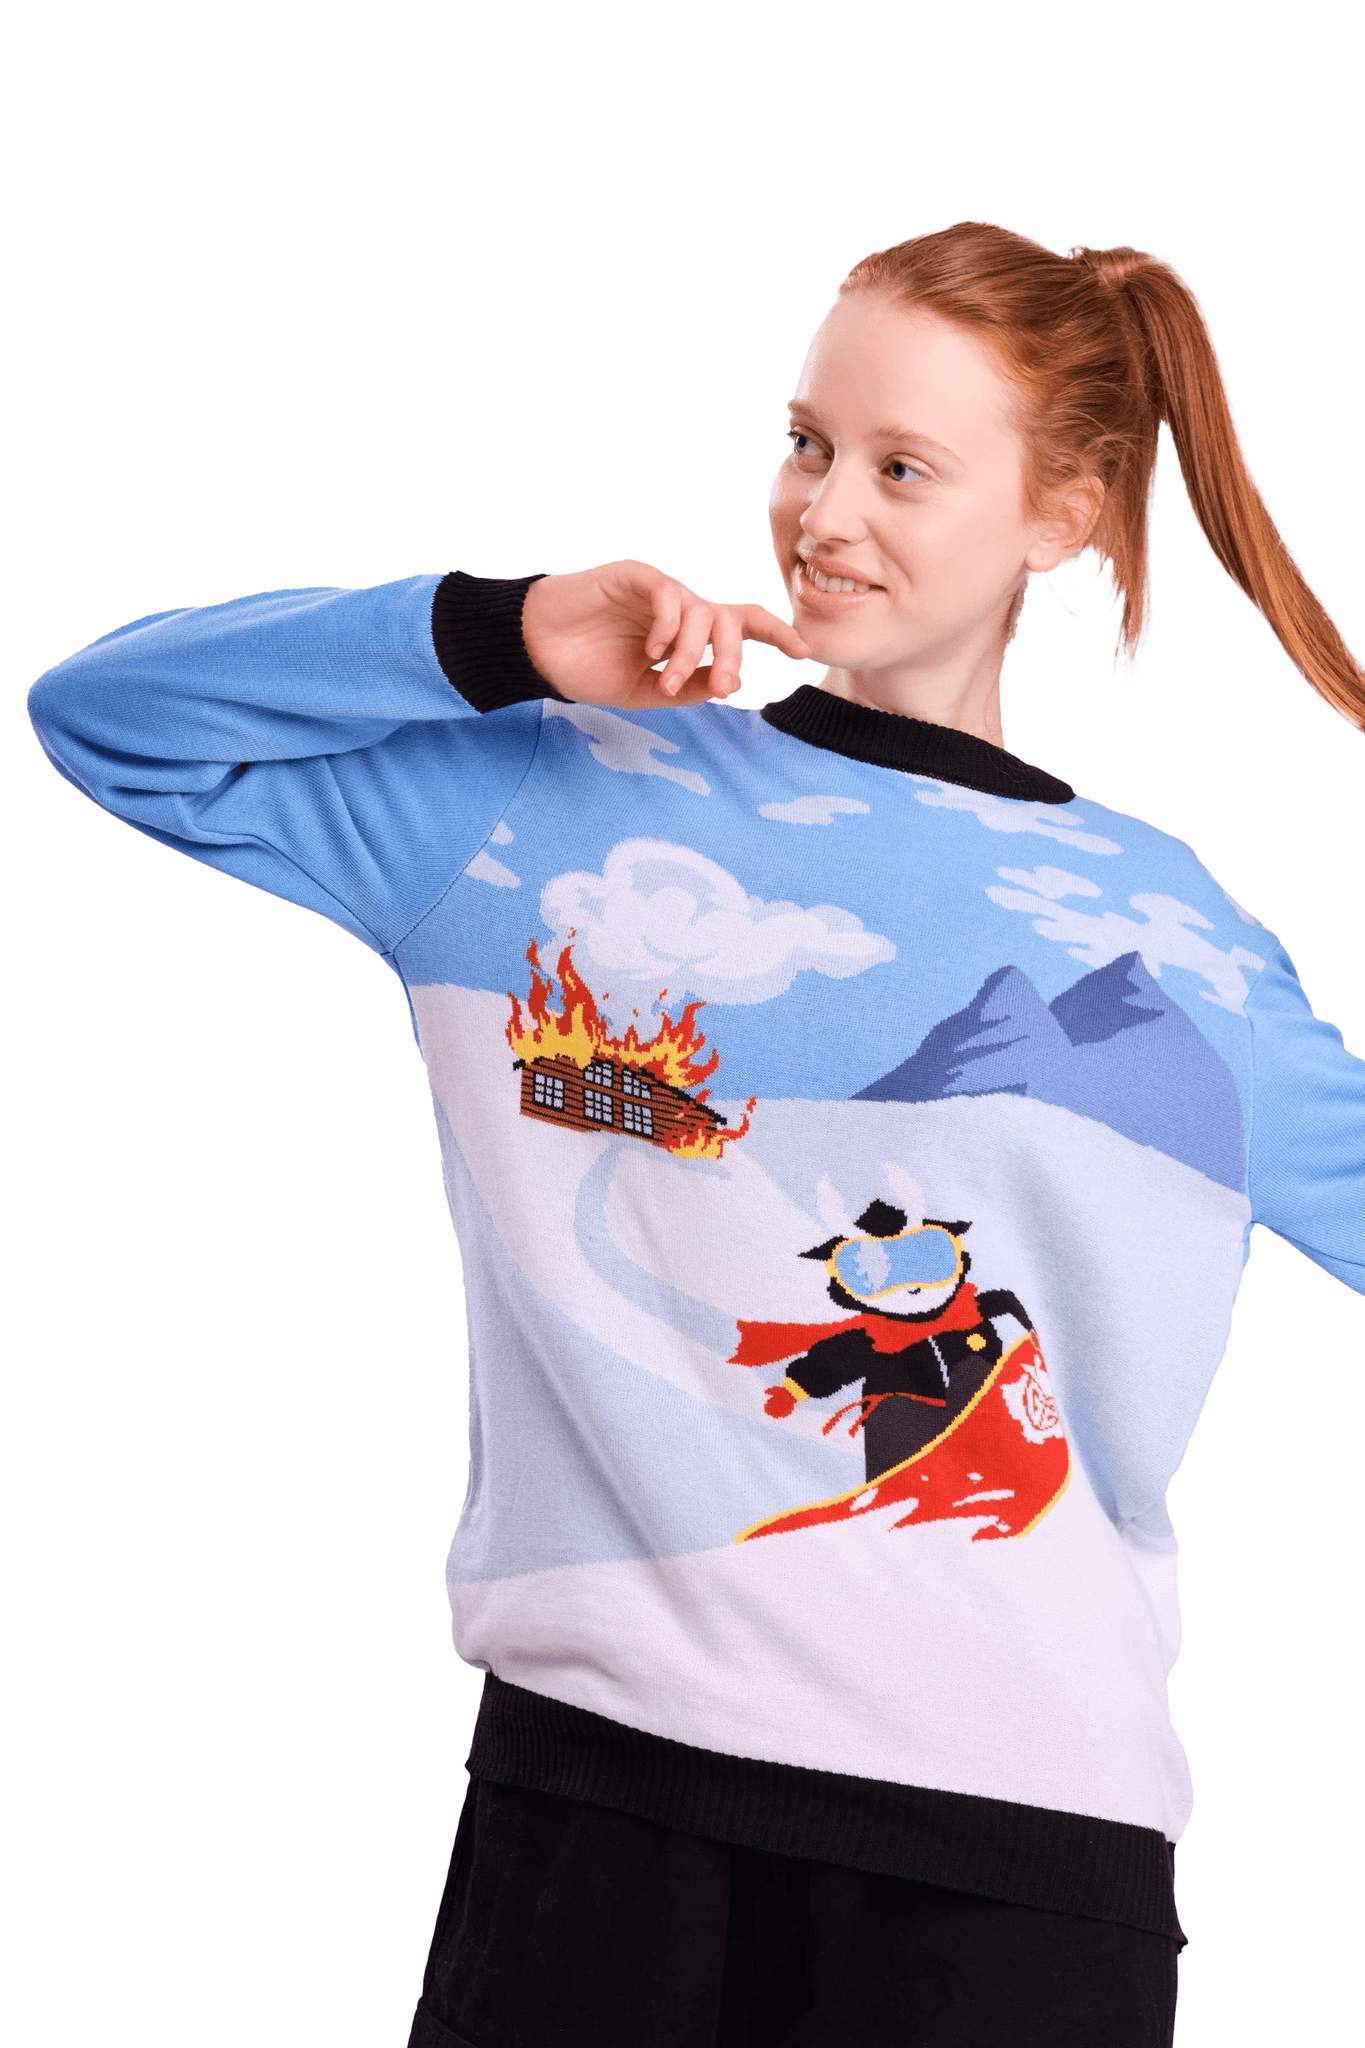 G2 Sami Holiday Jumper 2022, a festive and cozy choice. Show your G2 Esports spirit with this limited edition holiday sweater